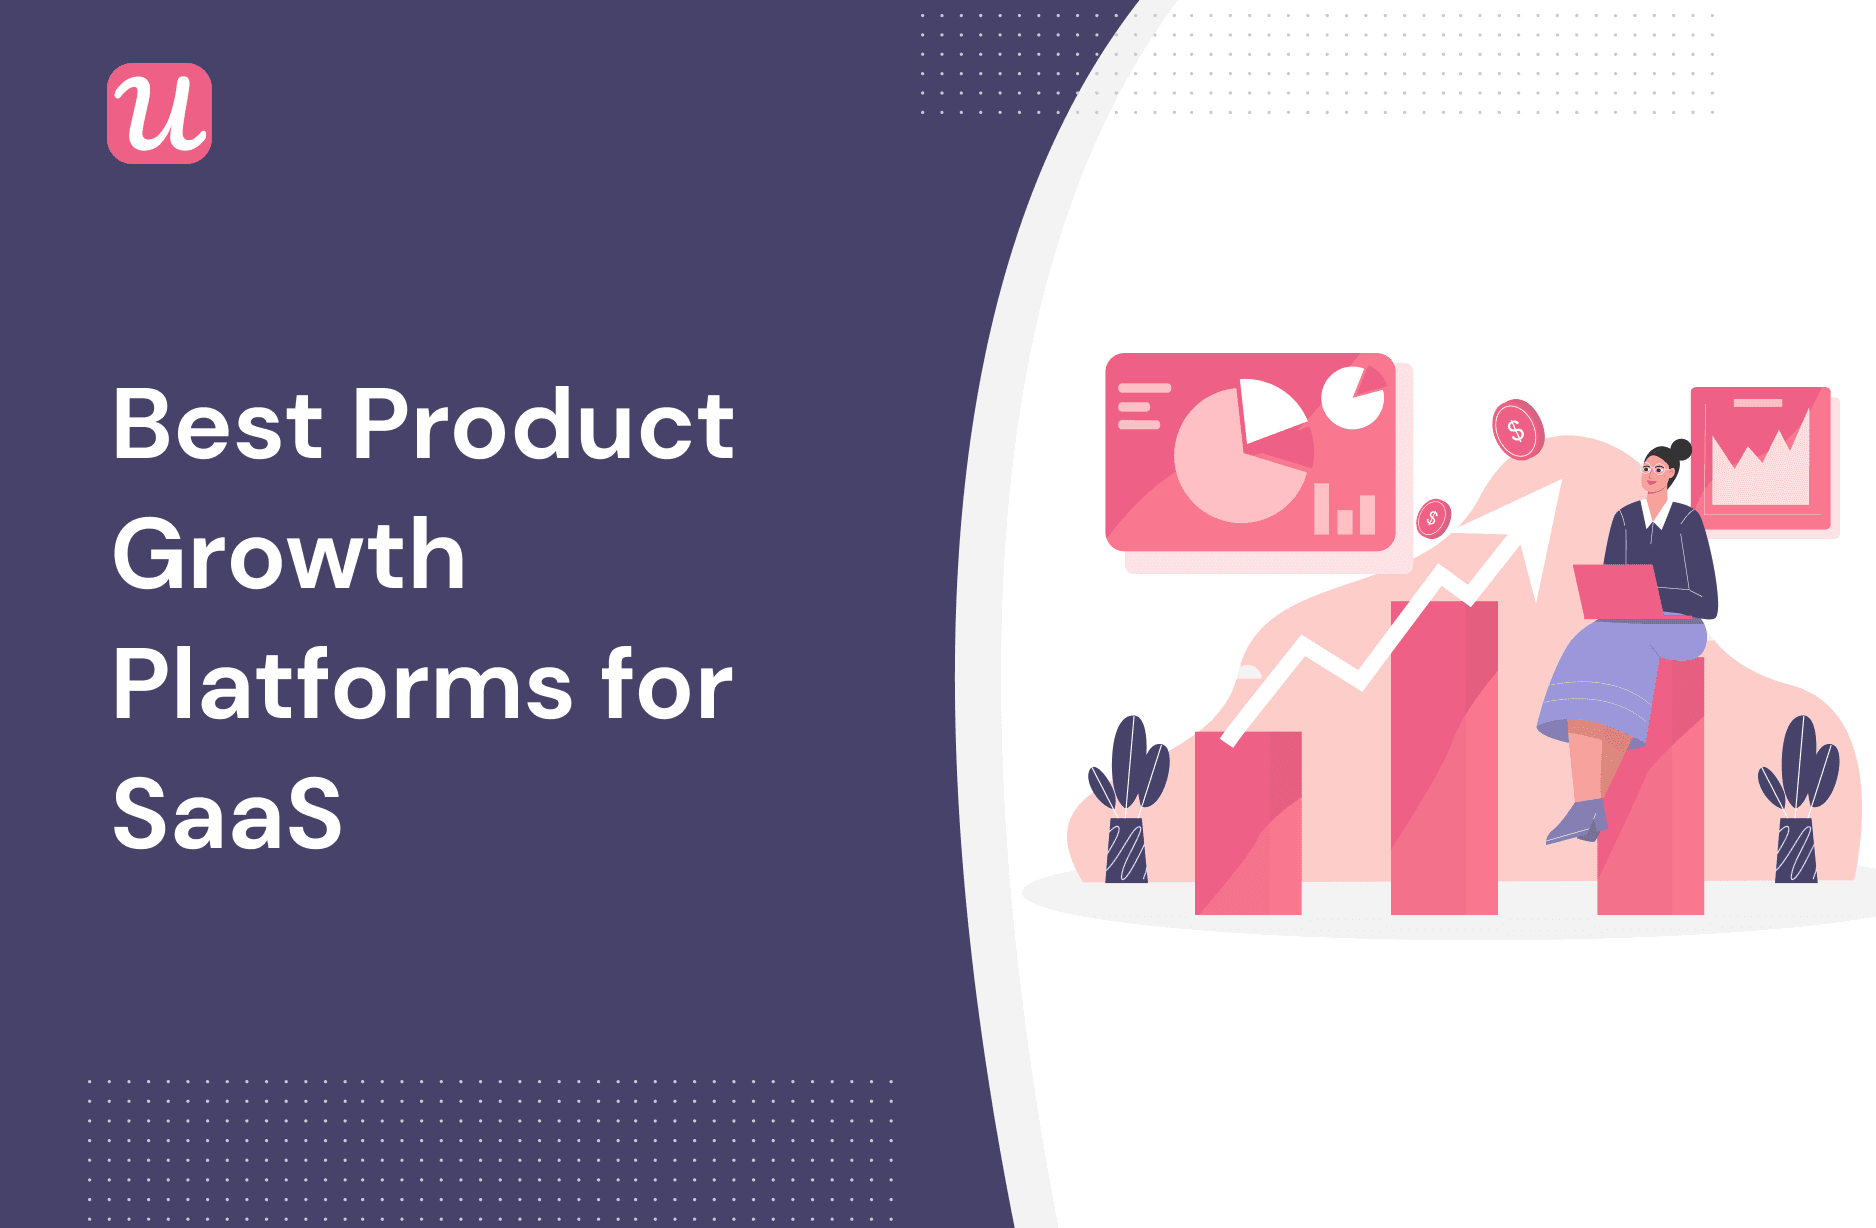 Best Product Growth Platforms for SaaS